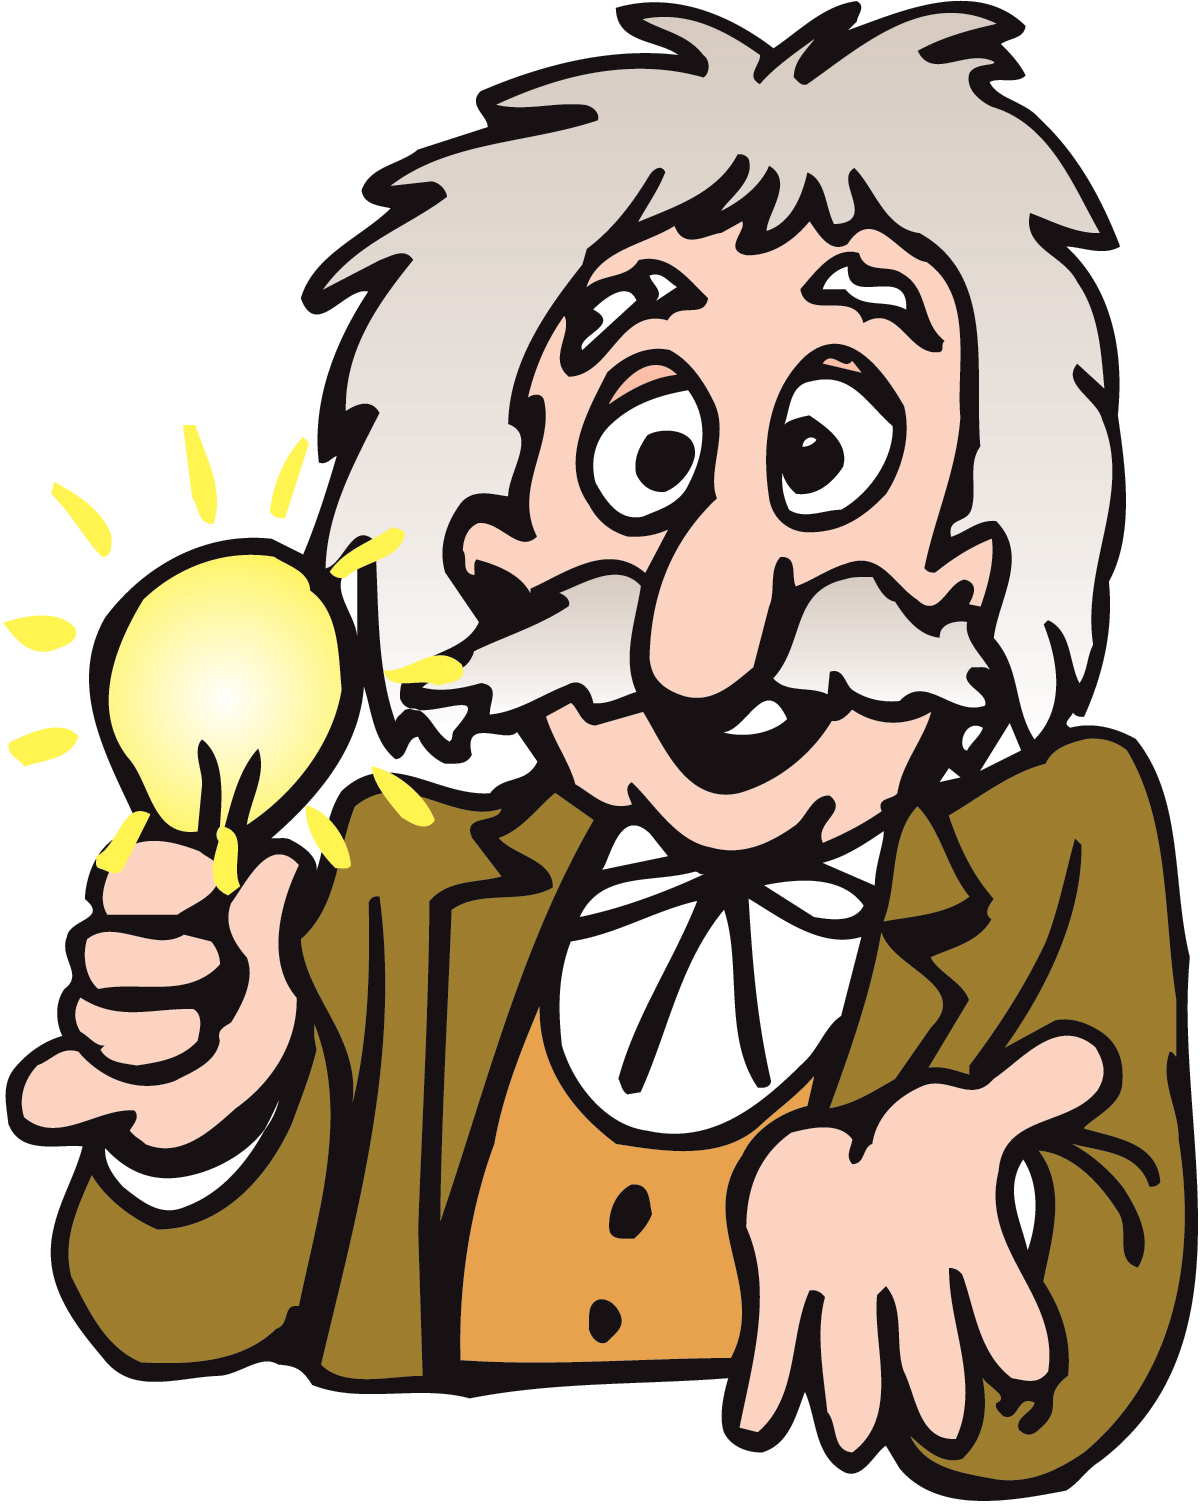 Clip Arts Related To : inventors clipart. 